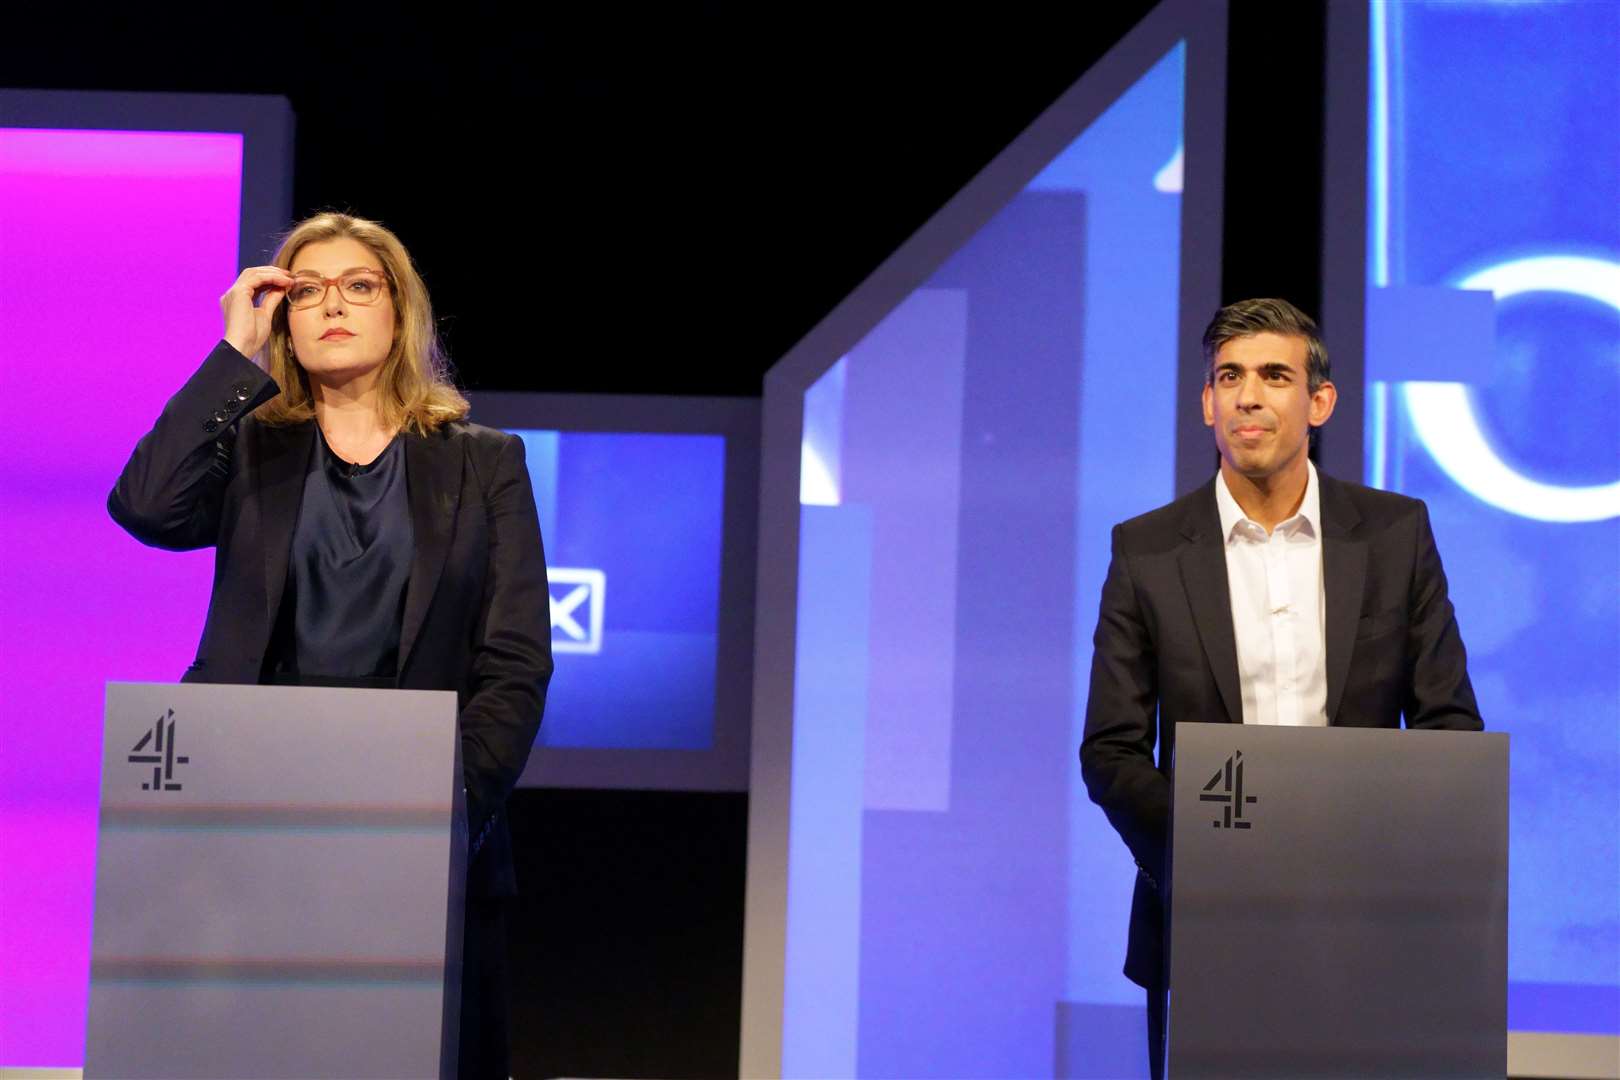 Penny Mordaunt and Rishi Sunak who clashed over tax in the leadership debate (Victoria Jones/PA)